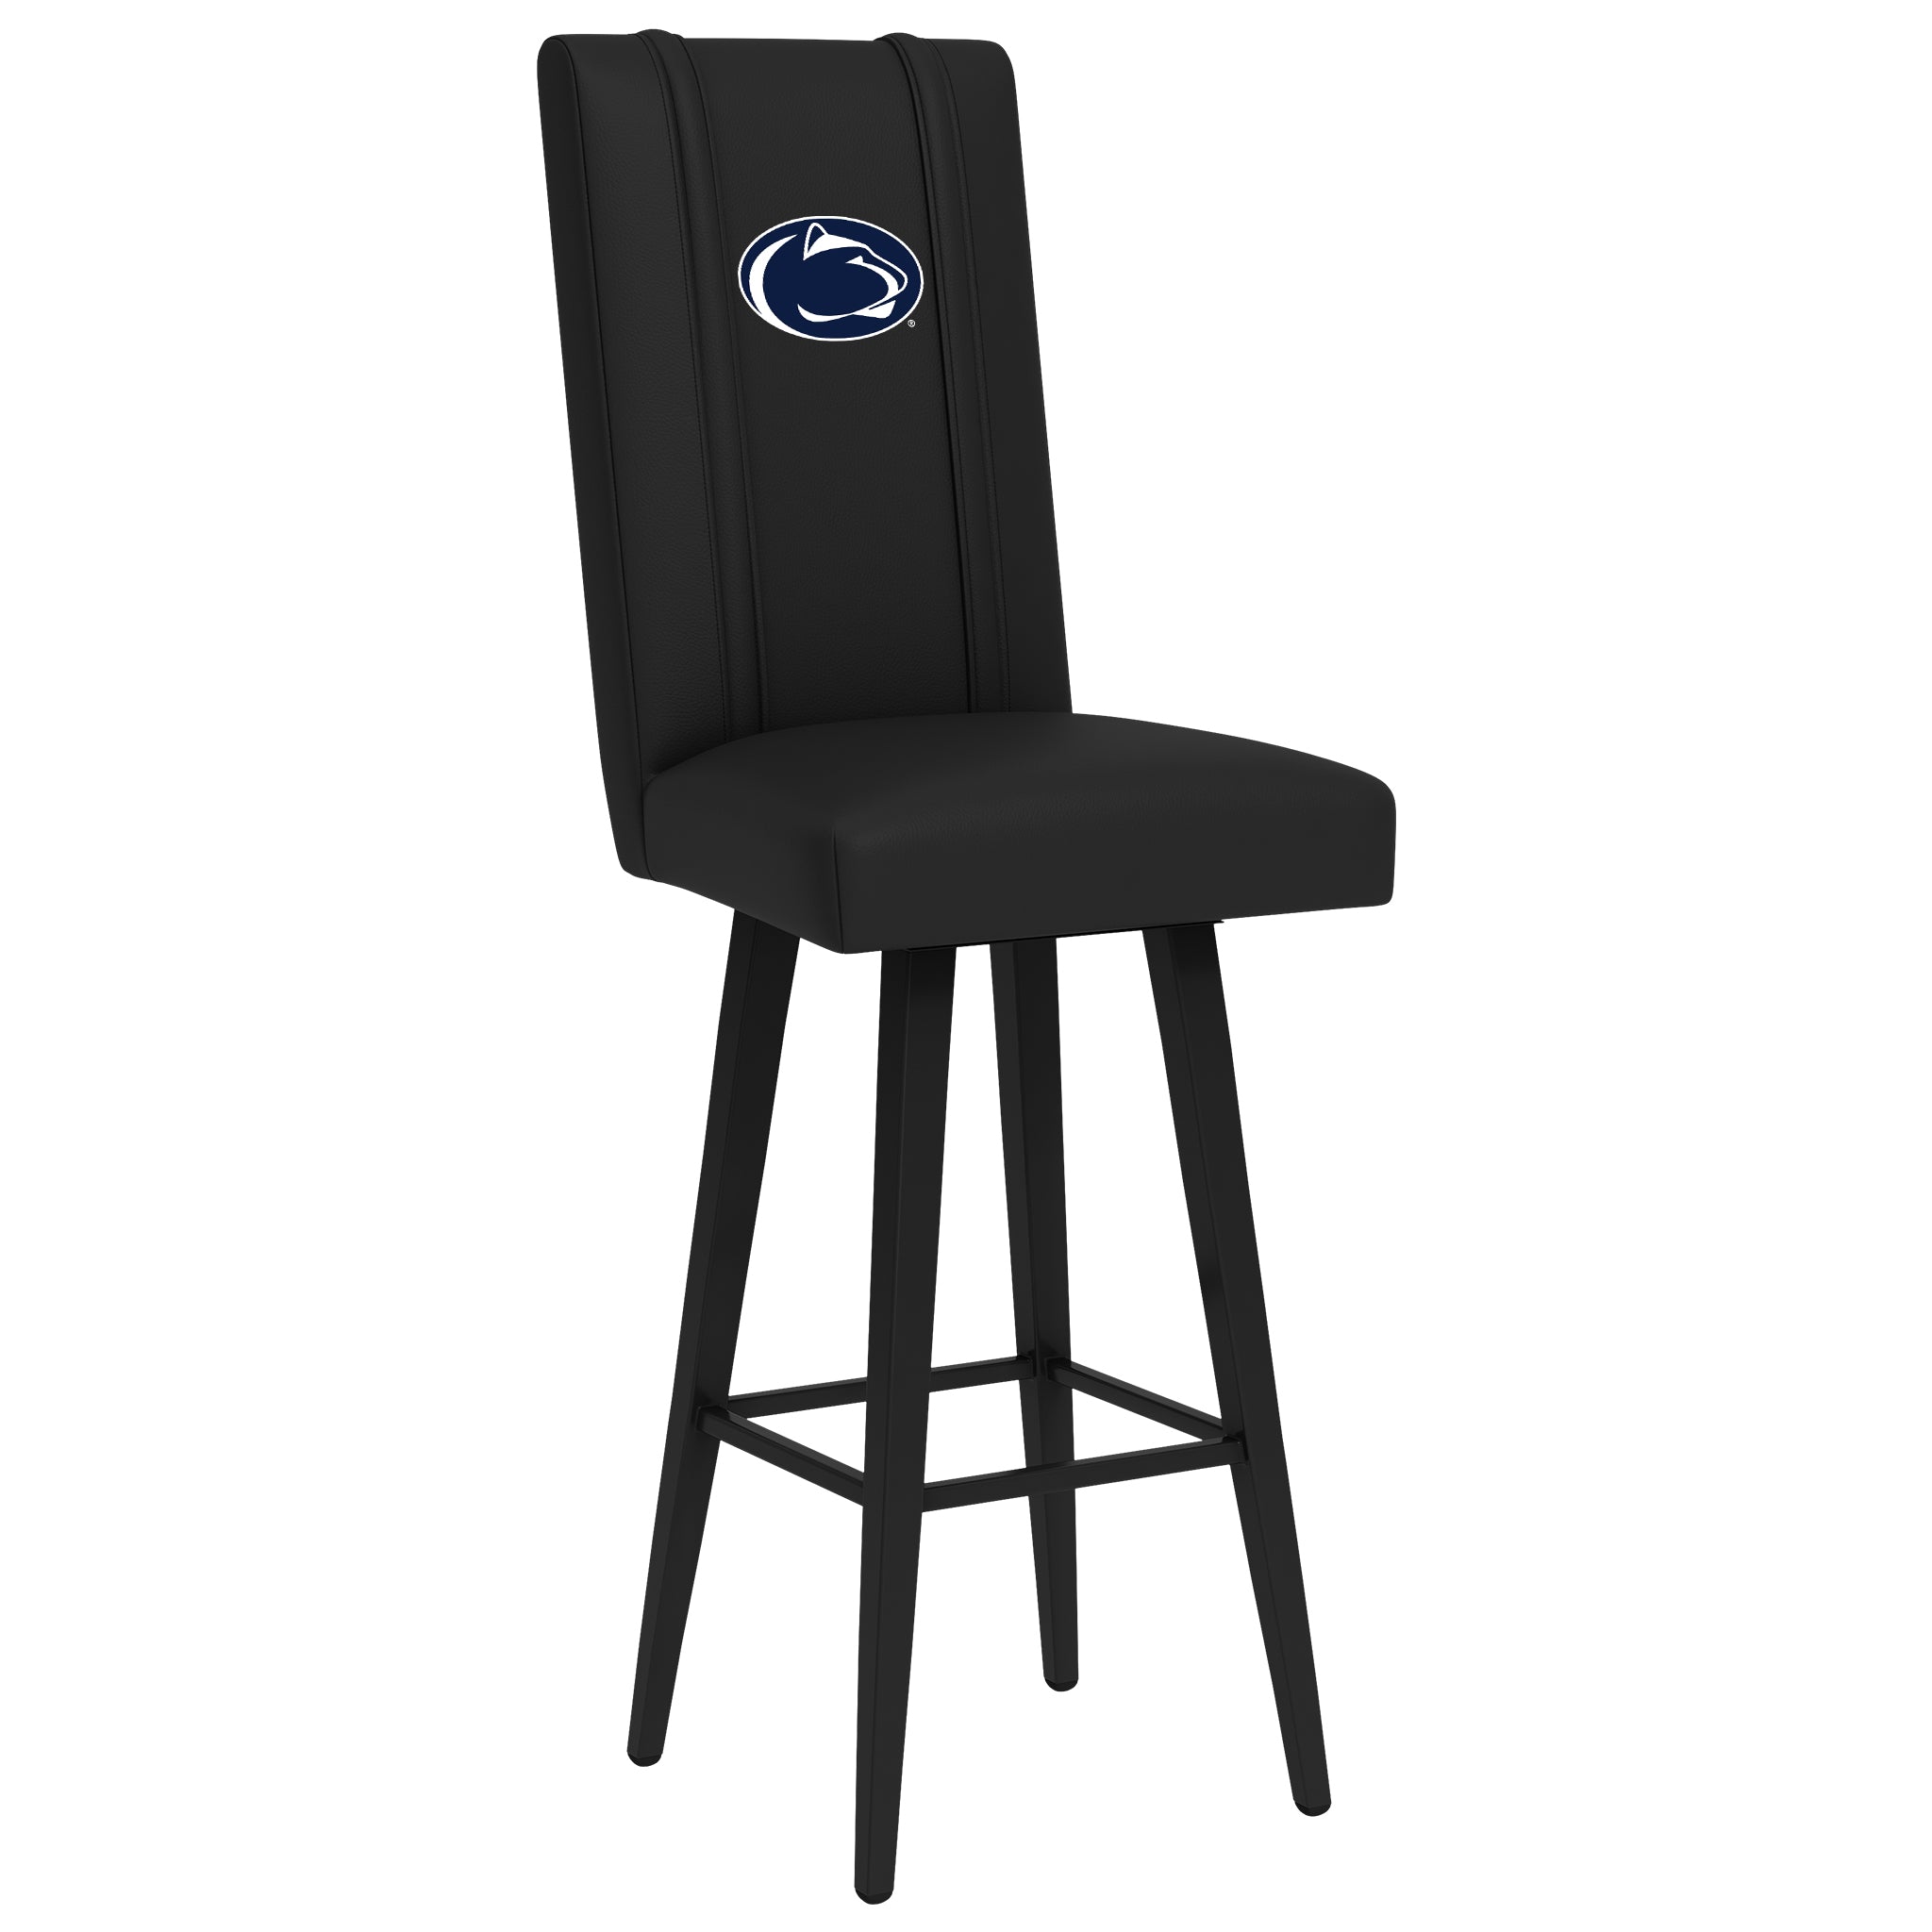 Penn State Nittany Lions Swivel Bar Stool 2000 With Penn State Nittany Lions Logo